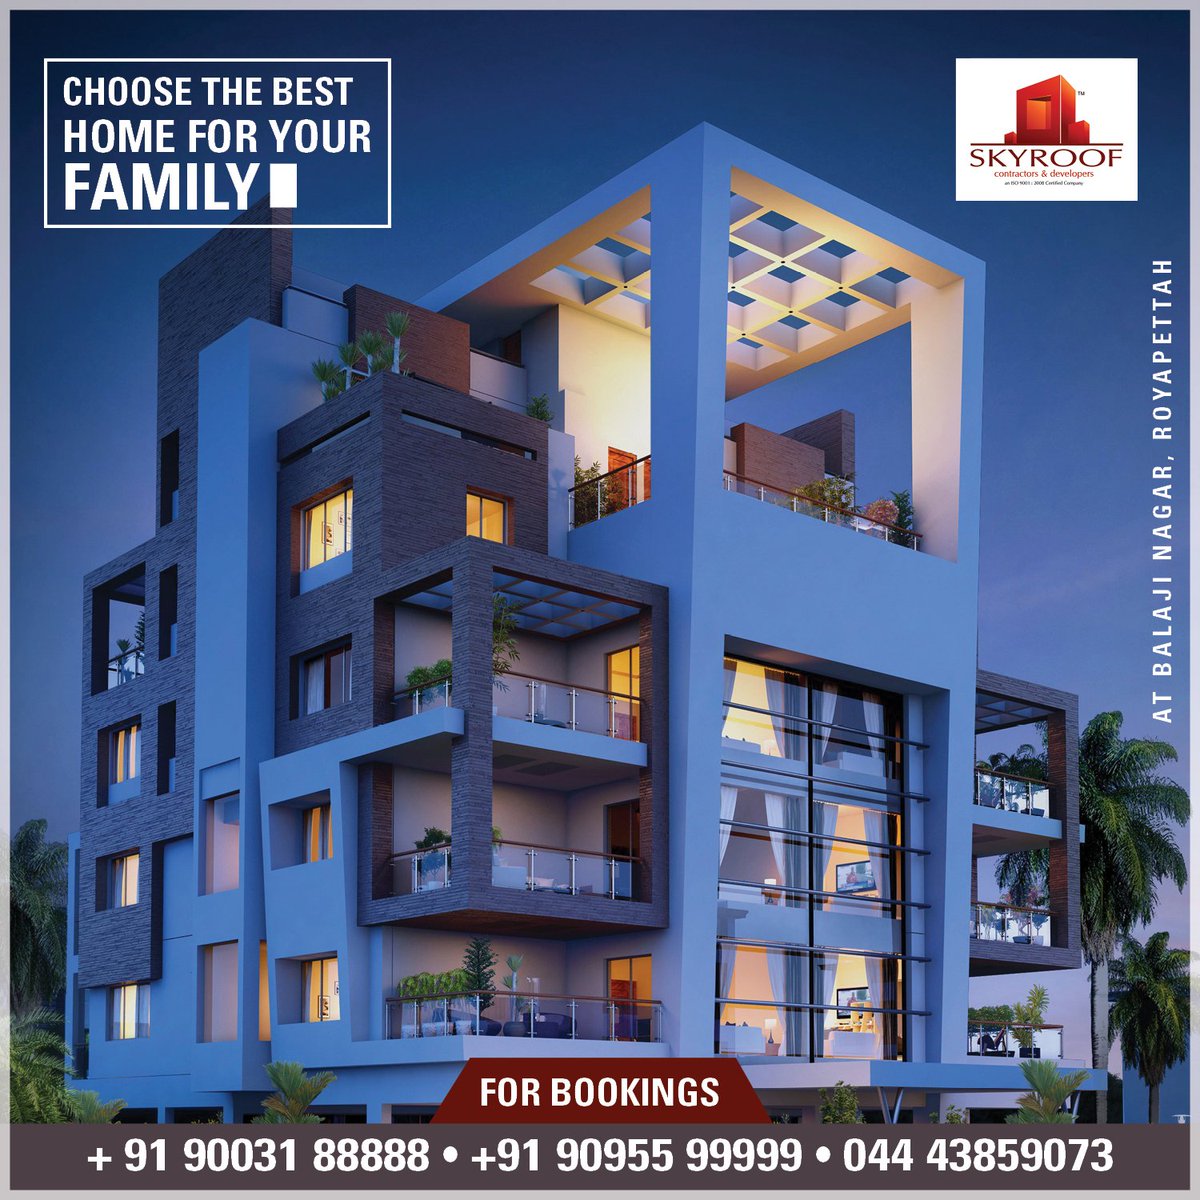 Your dream home is ready just for you, all you have to do is smile and move in! Choose the premium lifestyle Apartments at Skyroof Contractors.
For Booking Call Us +91 90031 88888, 90955 99999. For details - goo.gl/uwnzhz   #ChennaiRealEstate #ChennaiApartments #Flats